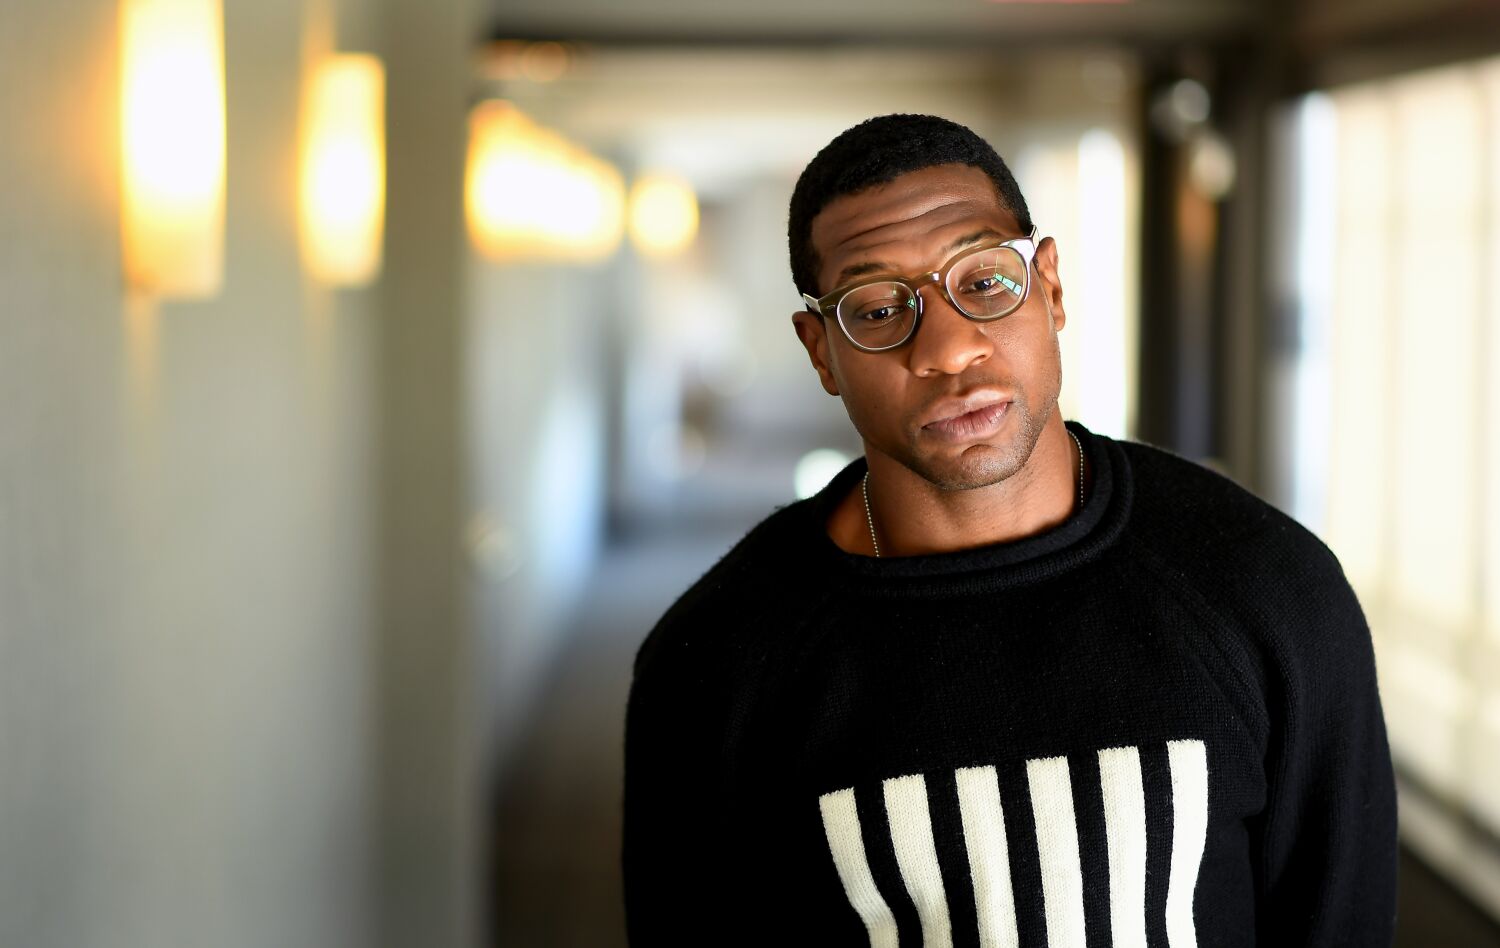 News Analysis: What Jonathan Majors' dramatic rise and fall says about race and justice in Hollywood